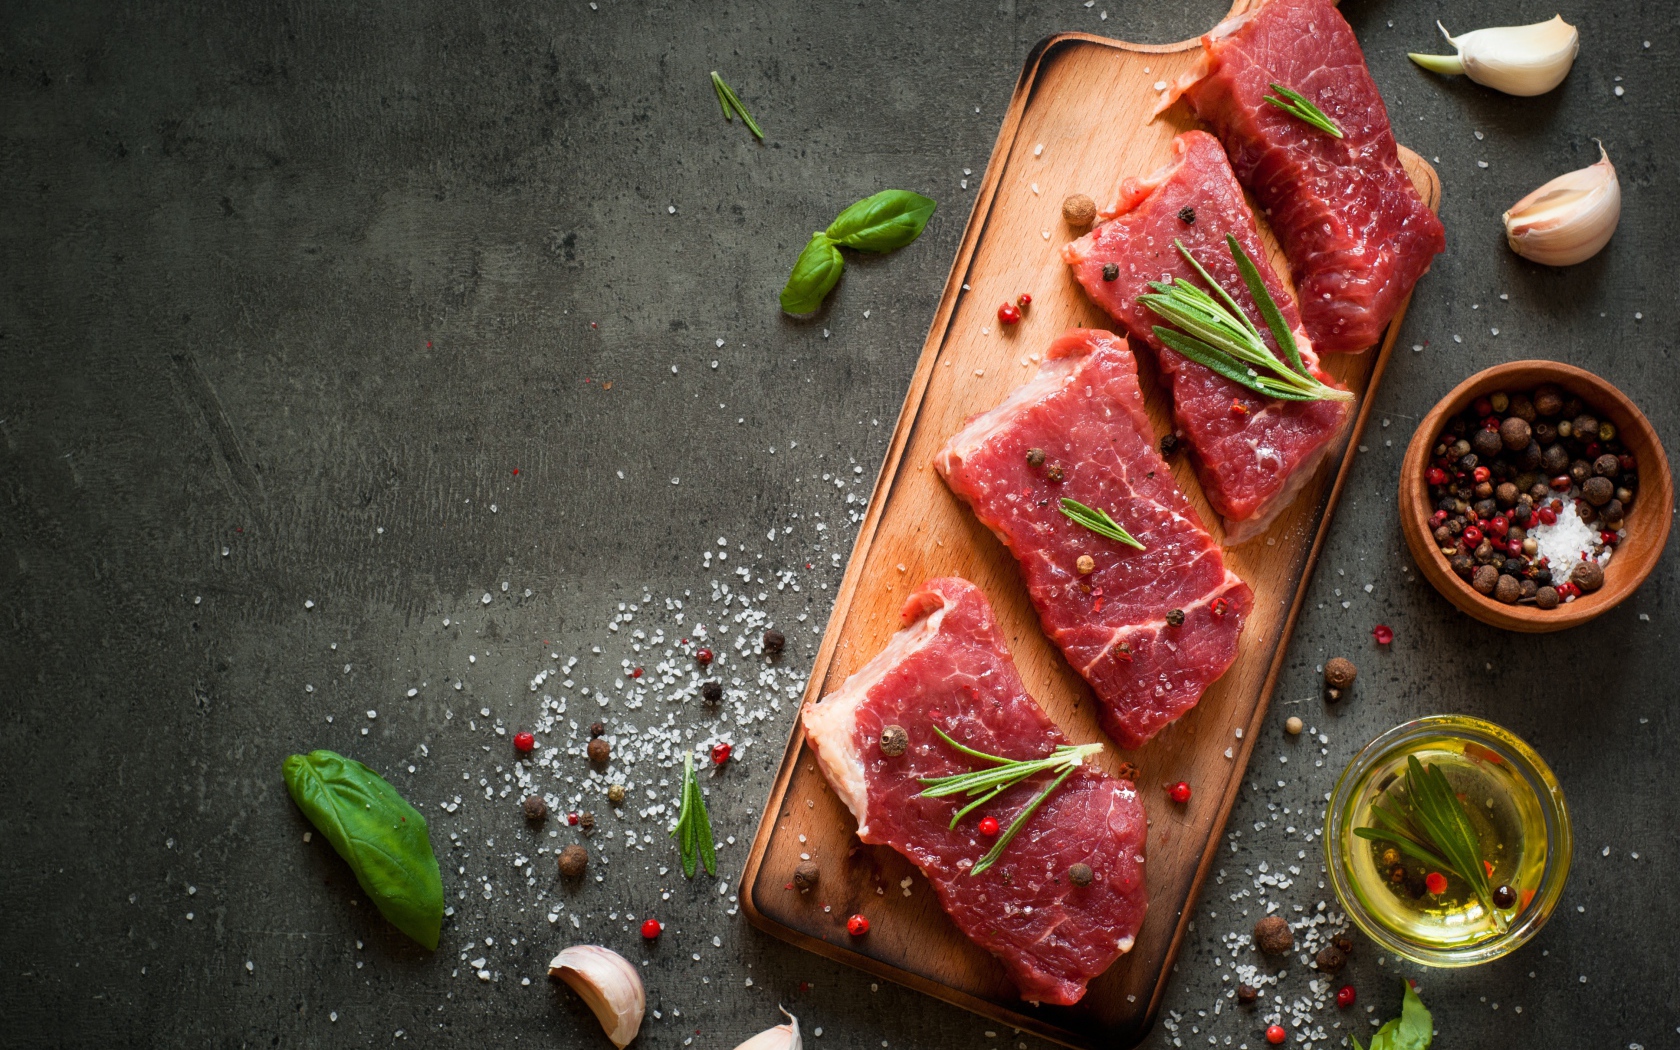 Chunks of meat on a cutting board with herbs and spices